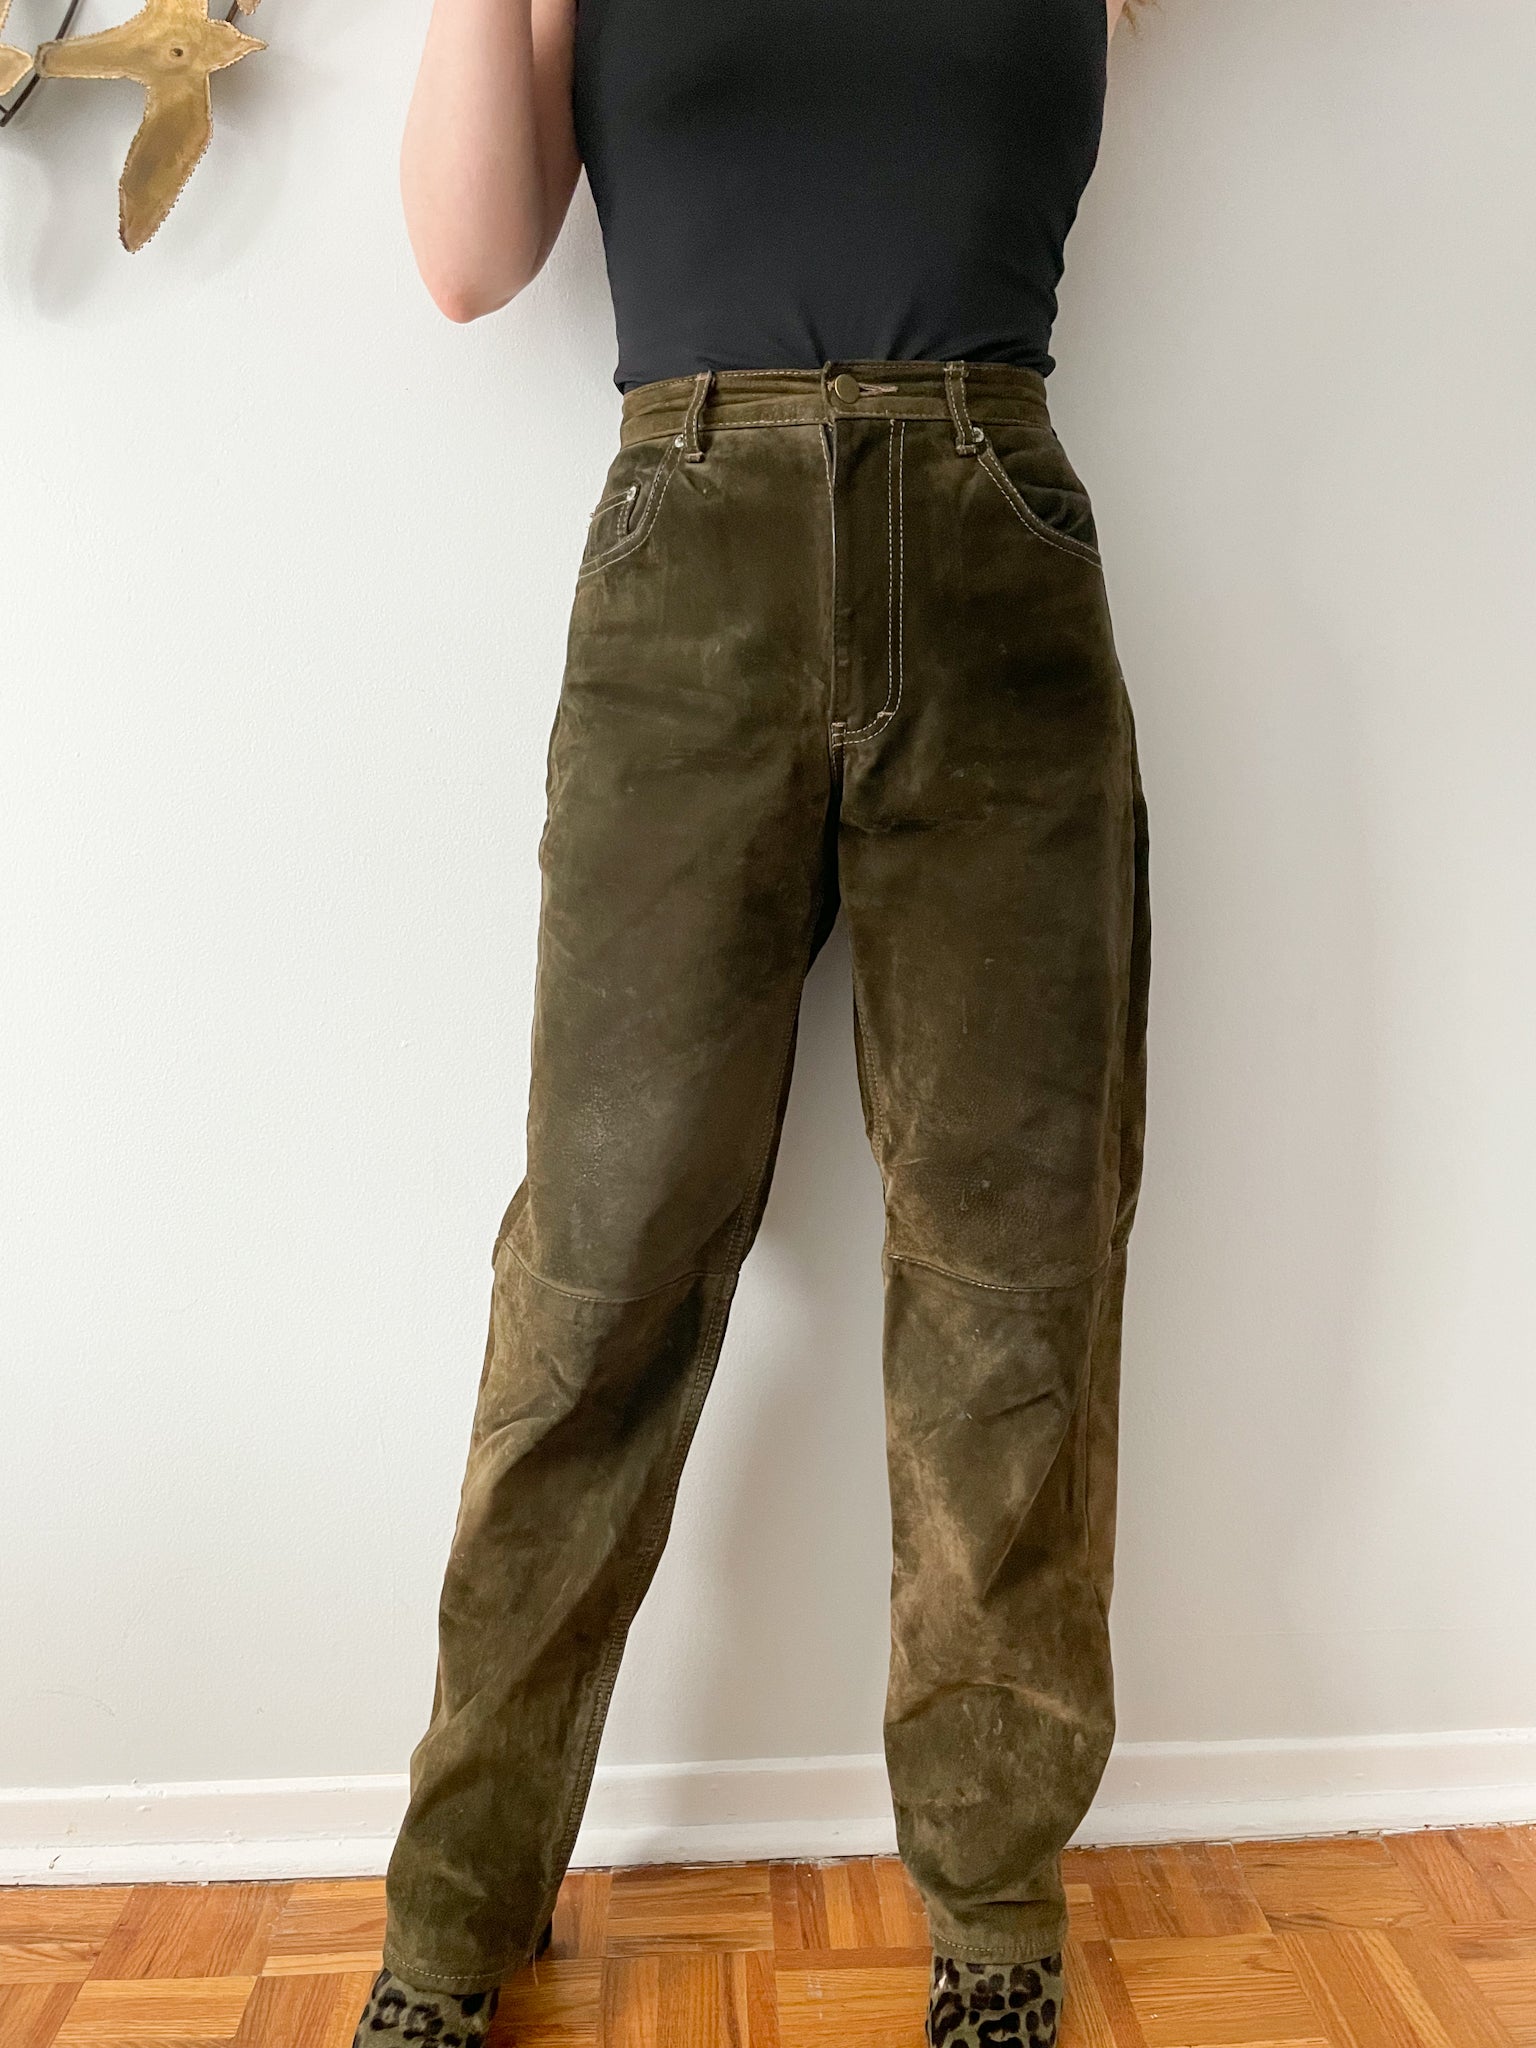 Per Suede Olive Green Genuine Suede Leather High Rise Barrel Pants - S – Le  Prix Fashion & Consulting